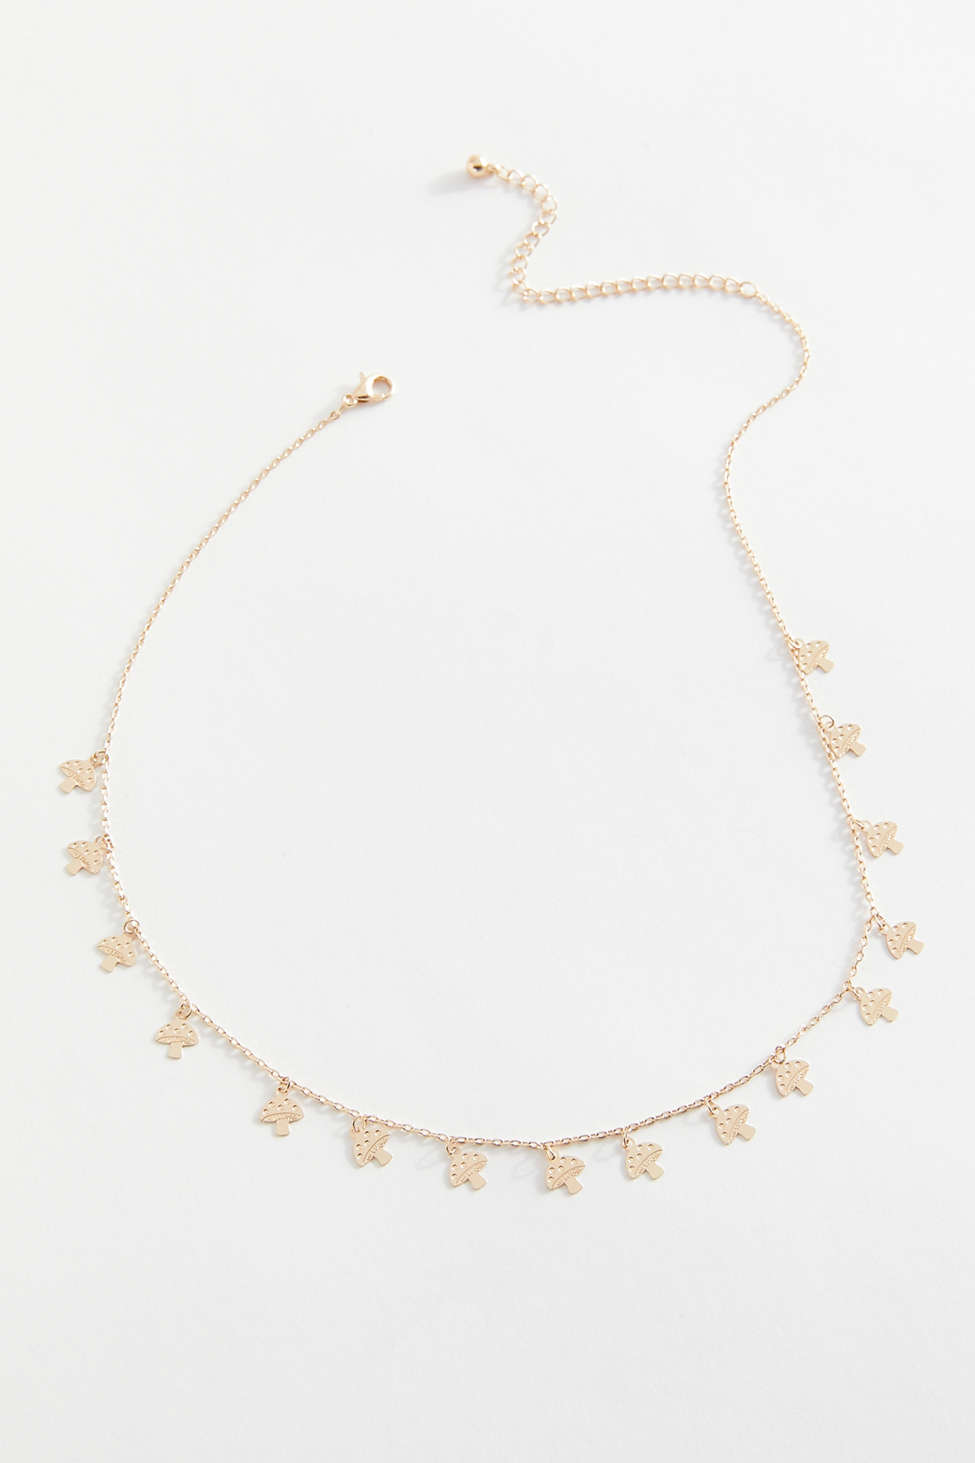 Lucky Charm Necklace | Urban Outfitters